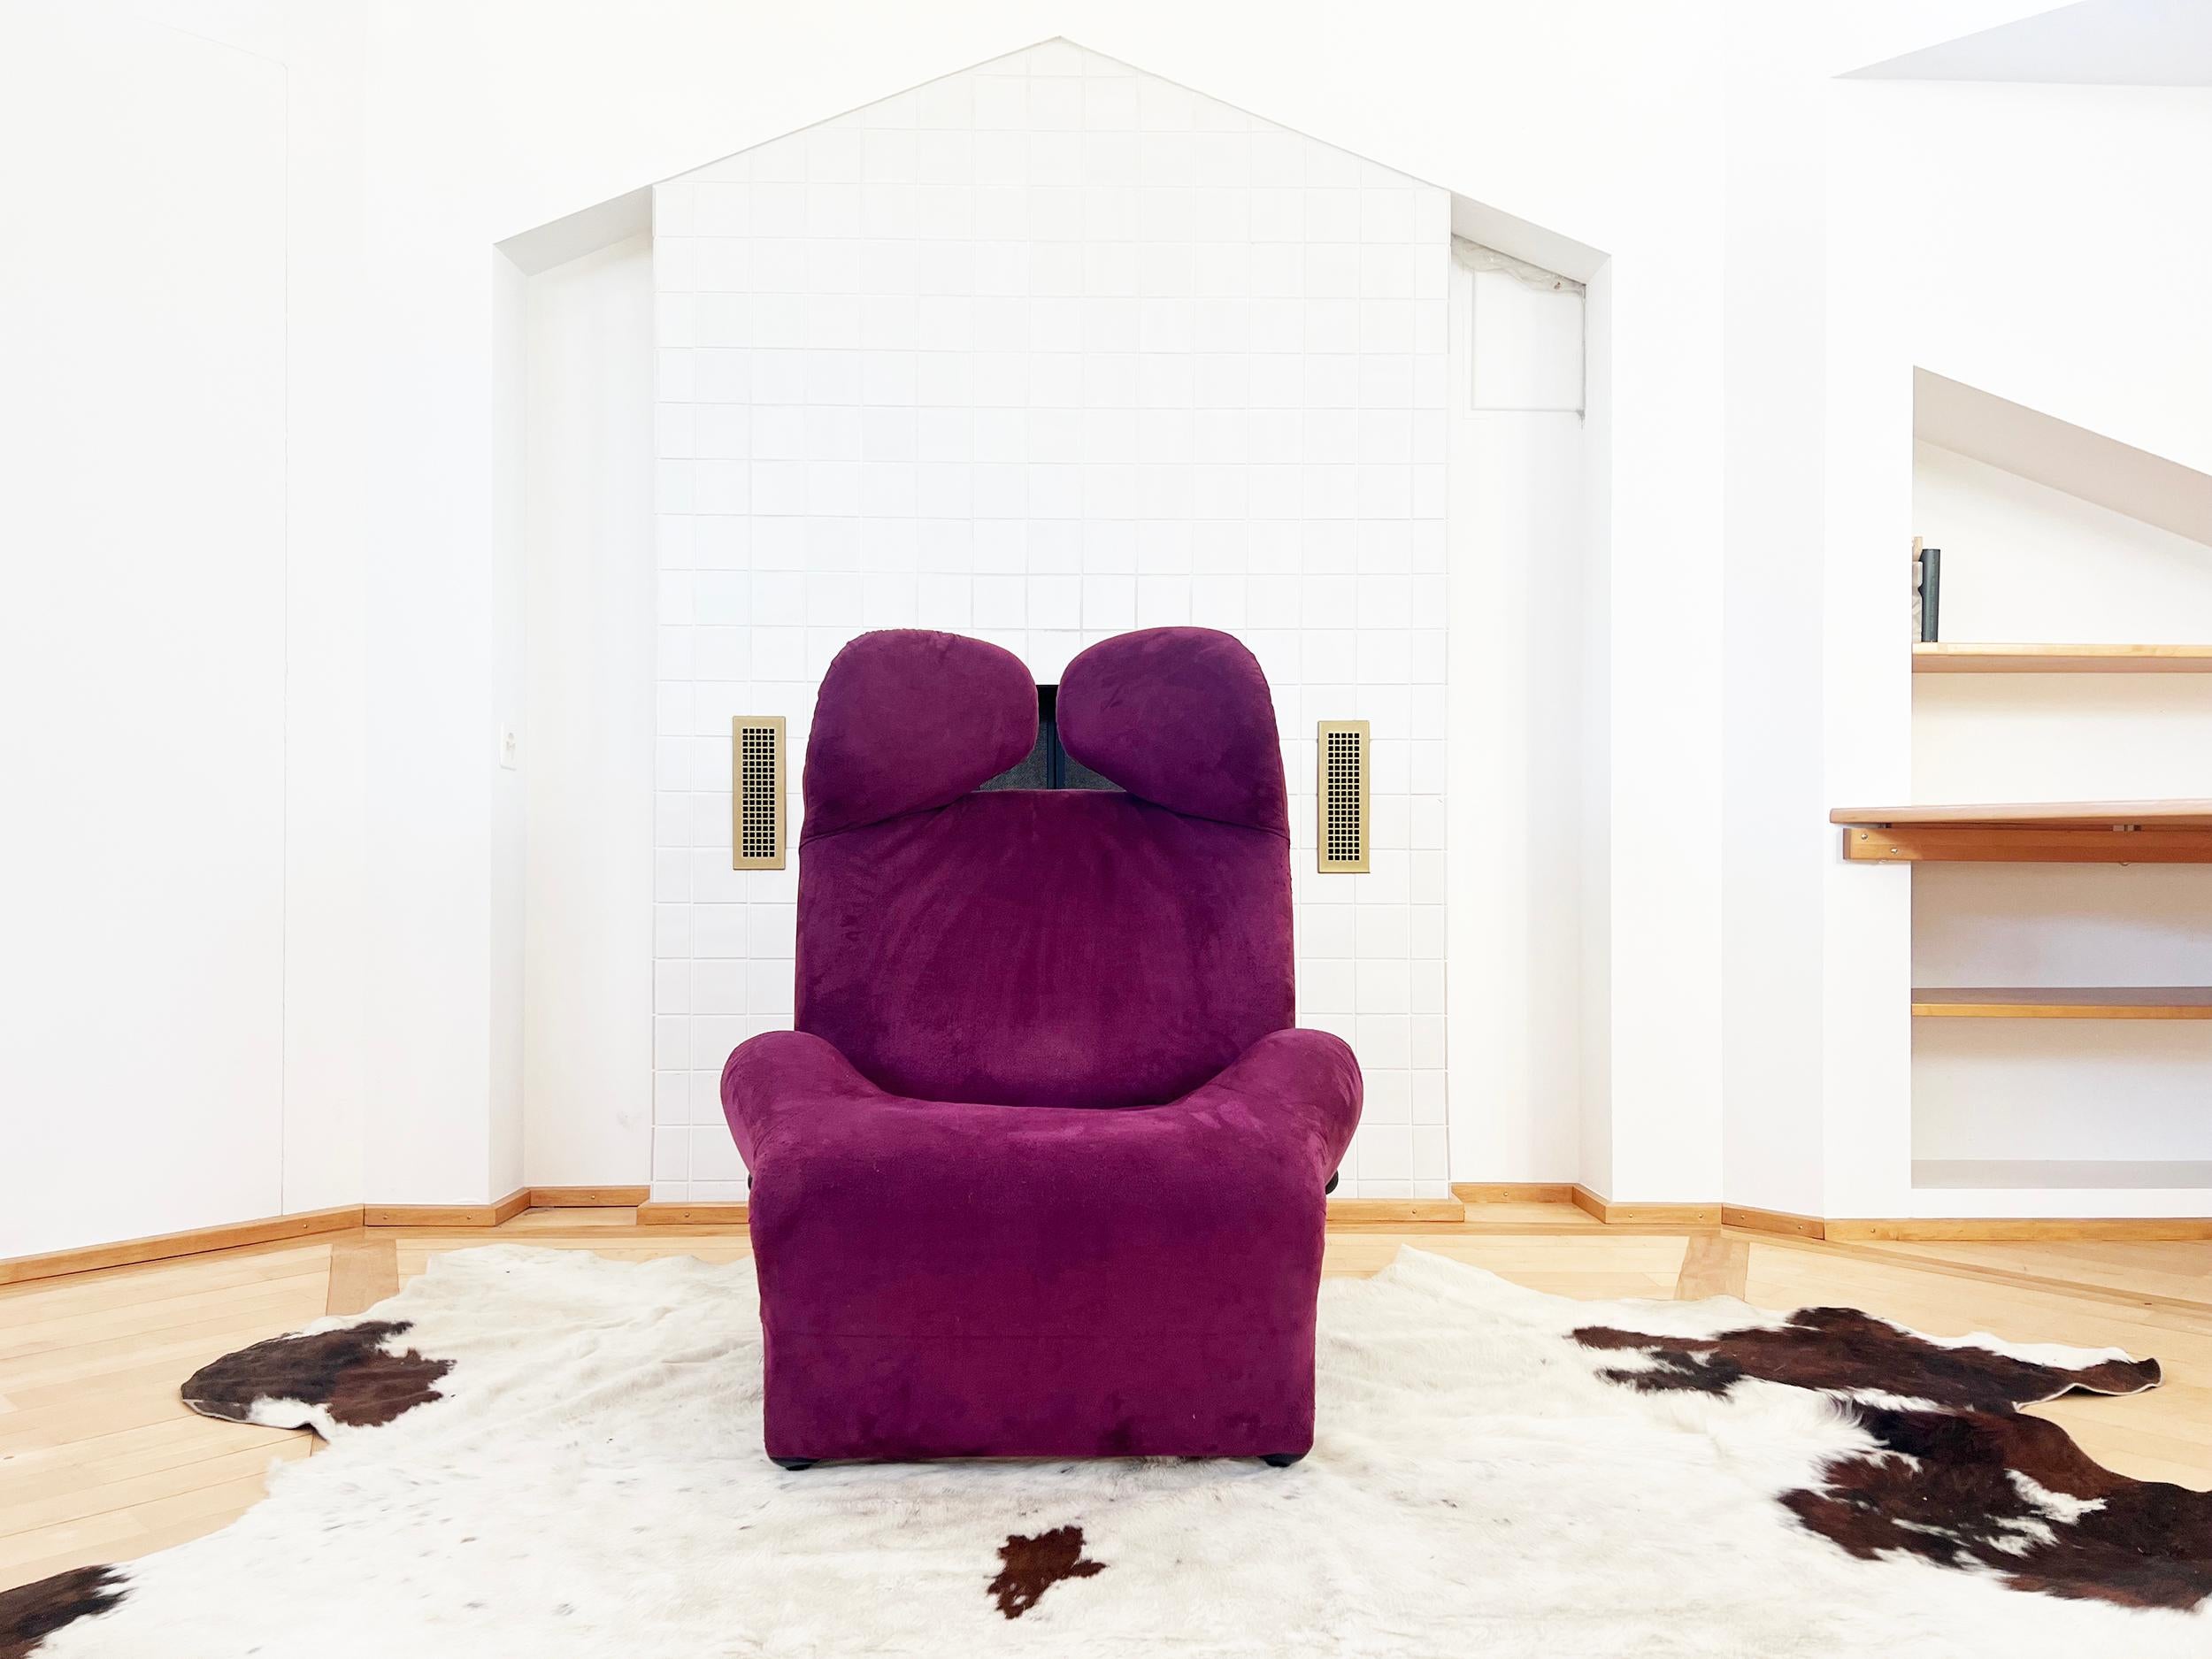 Fantastic chaise longue 111 Wink by Toshiyuki Kita for Cassina, Italy 80s in the most perfect purple suede textile.

This is a majorly cool version of the Chaise Longue designed by Japanese designer Toshiyuki Kita for the prestigious Italian